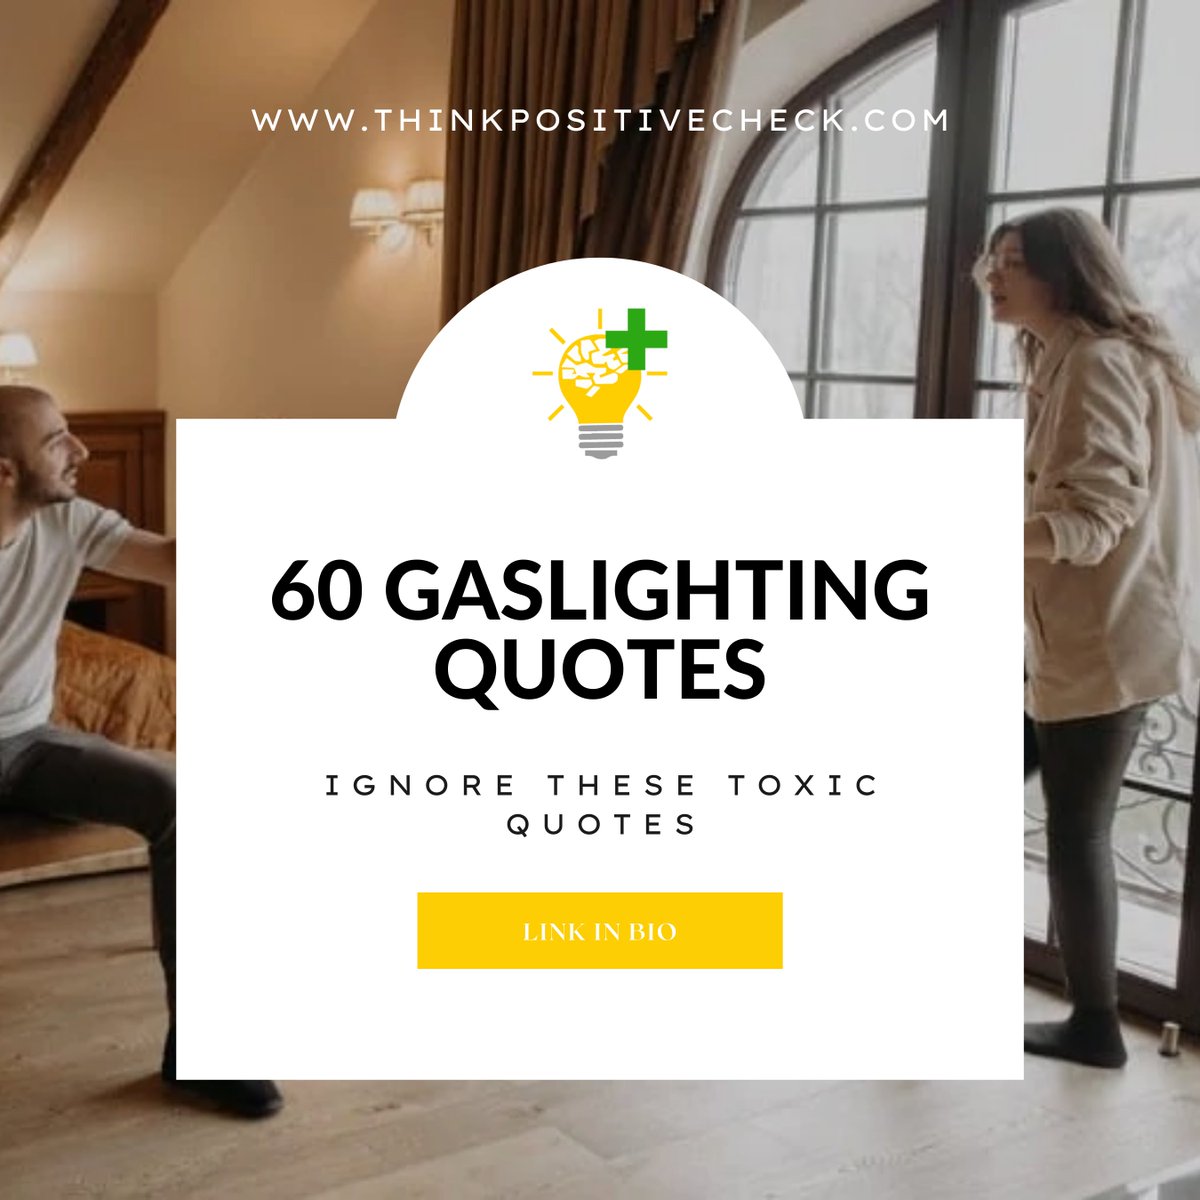 Read the article:'60 Gaslighting Quotes – Ignore These Toxic Quotes'
✔️Click the link:
🤳 buff.ly/3BGW3Z8

#thinkpositivecheck #positivevibes #motivationquote #growthmindset #powerfulquote #dailyquotesforyou #inspirationalquotes #quotestoliveby #health #affirmpositive